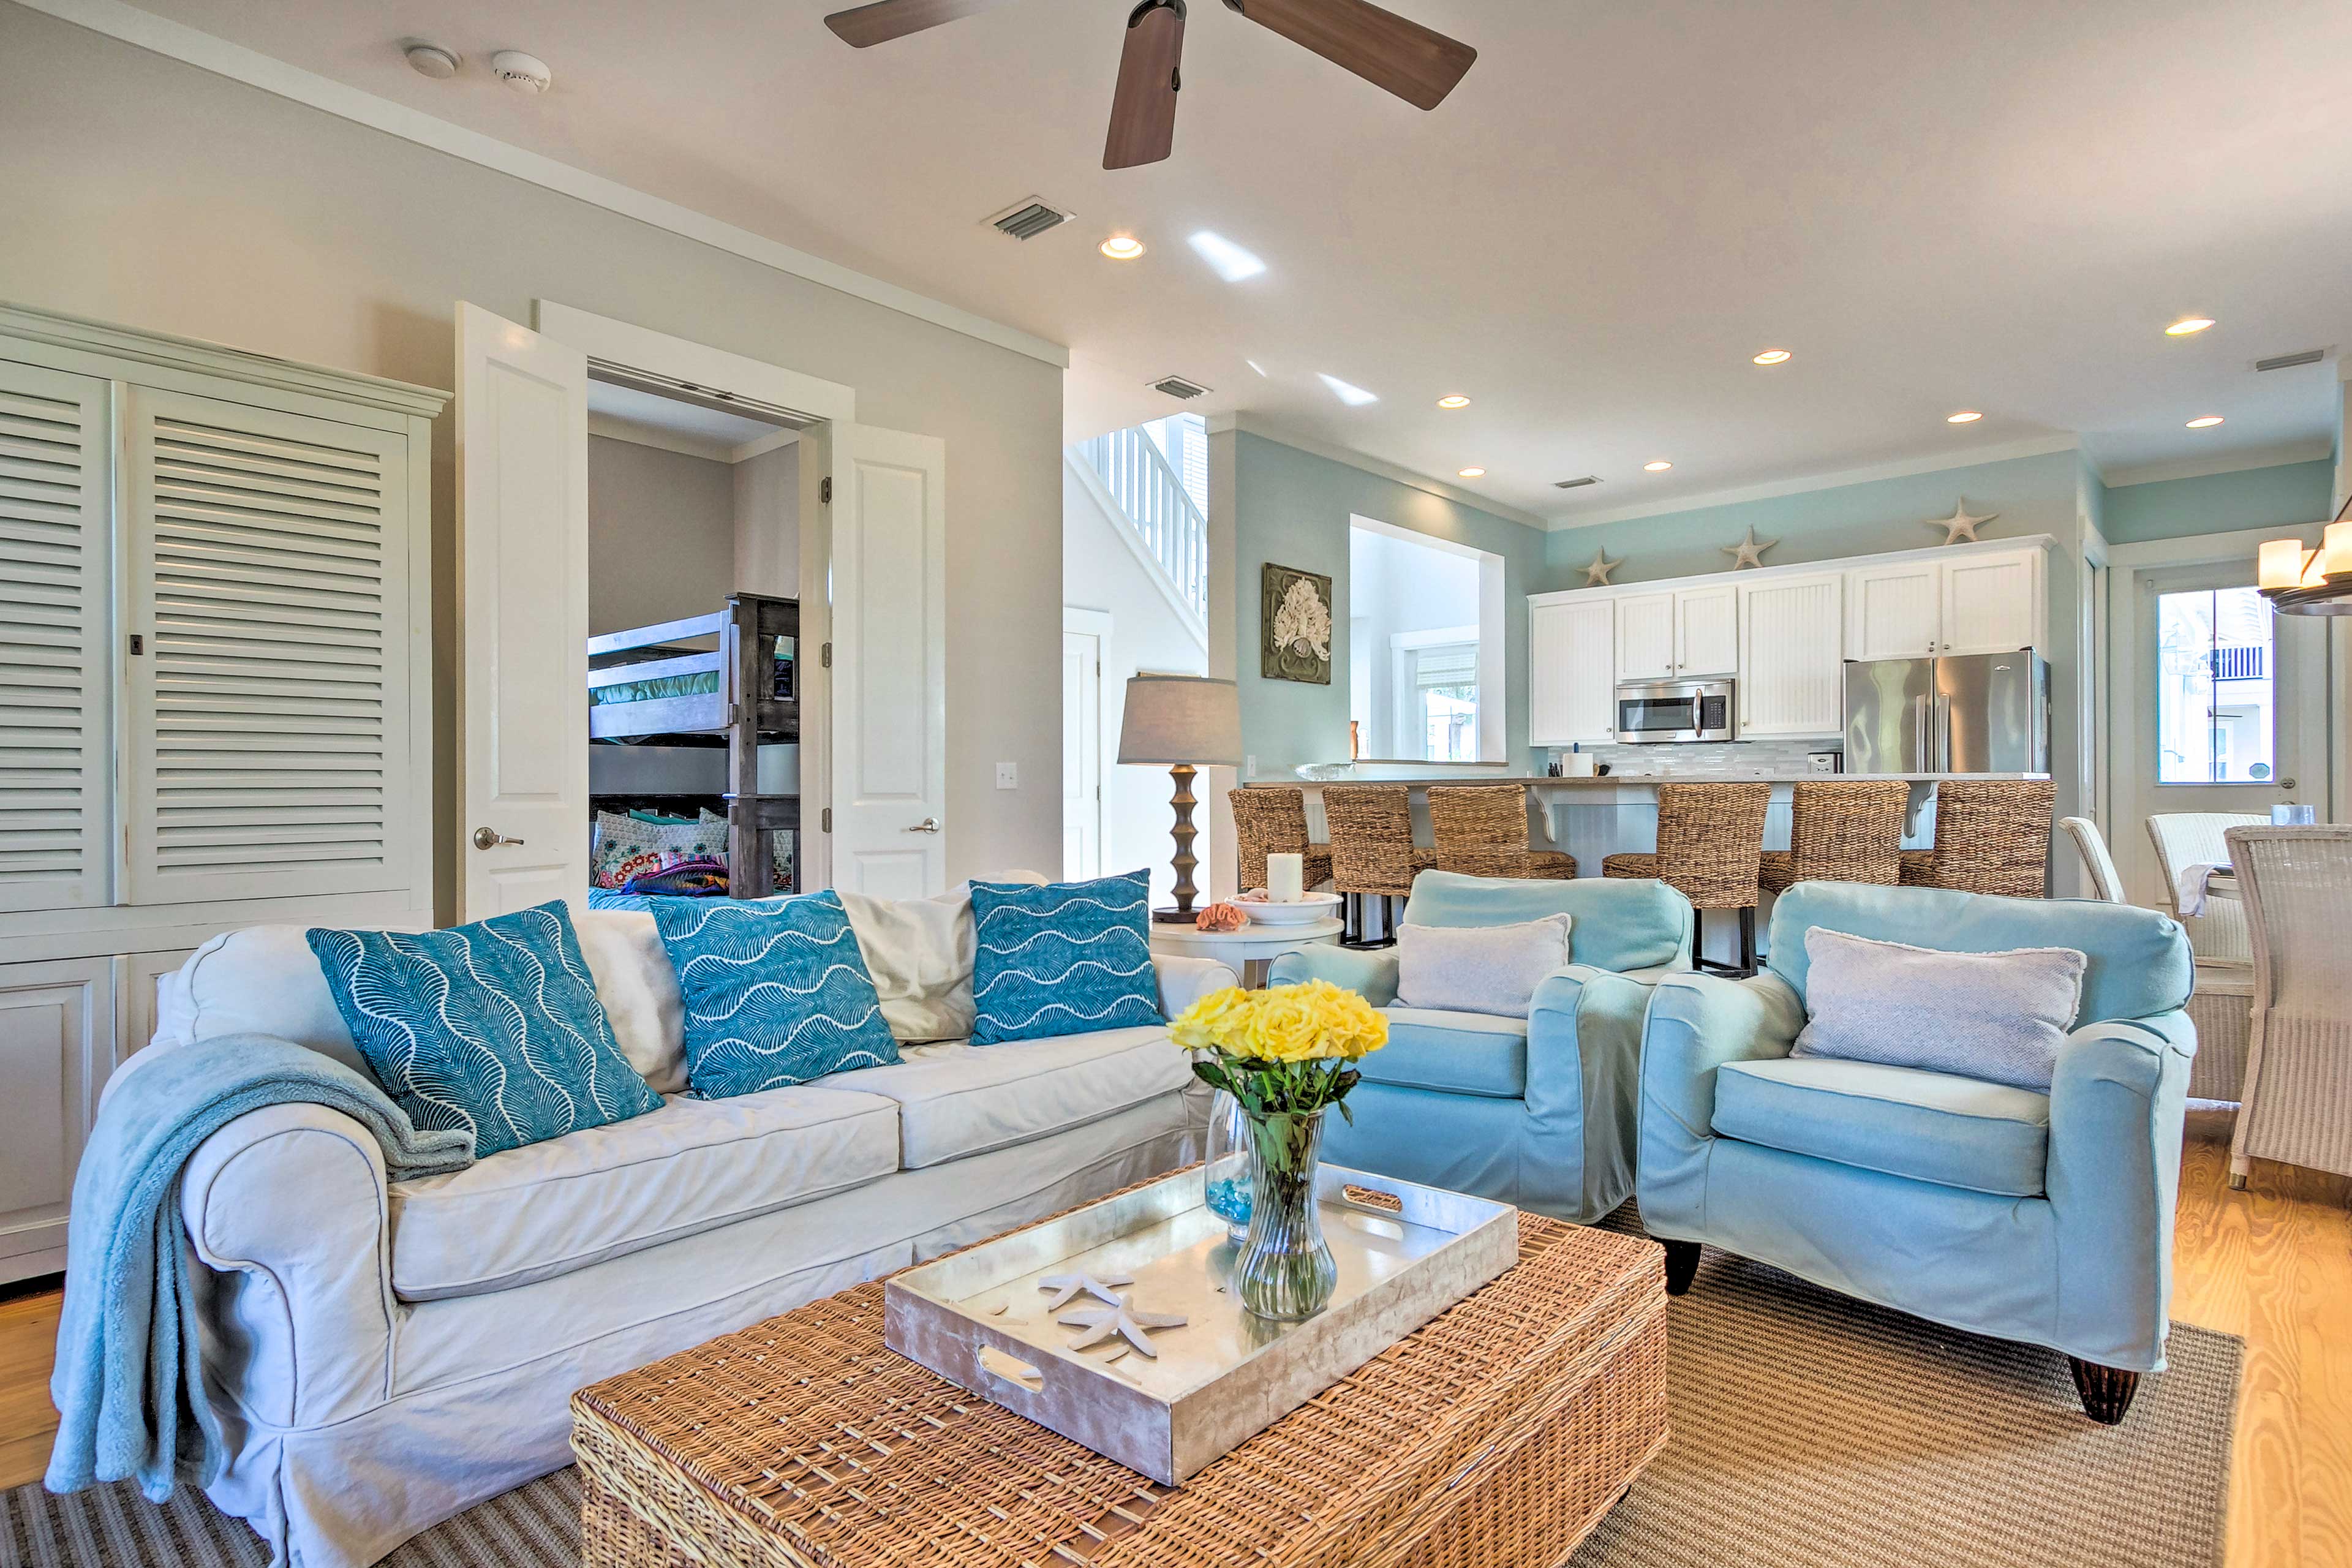 This bright and beachy interior boasts all the comforts of home.